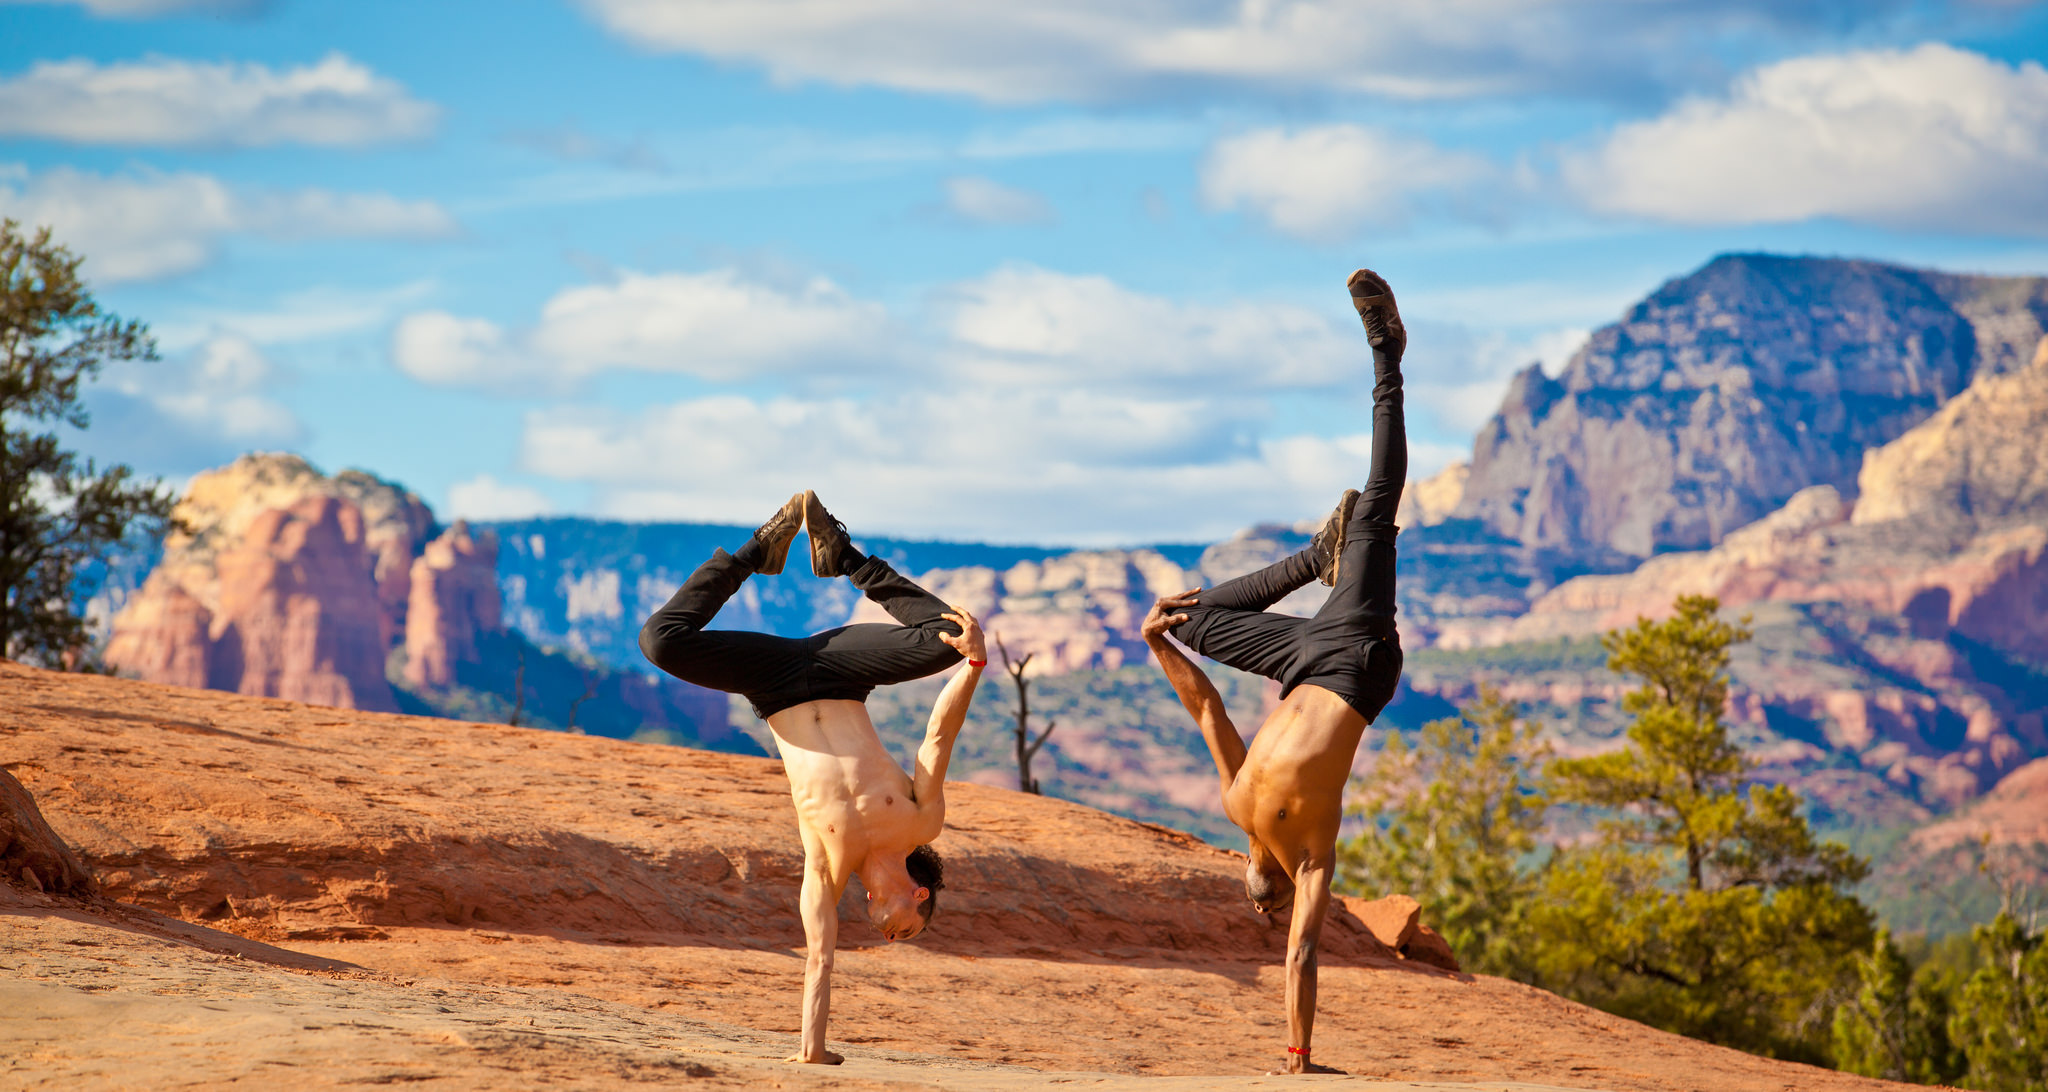 What happens at Sedona Yoga Festival? What can you expect?